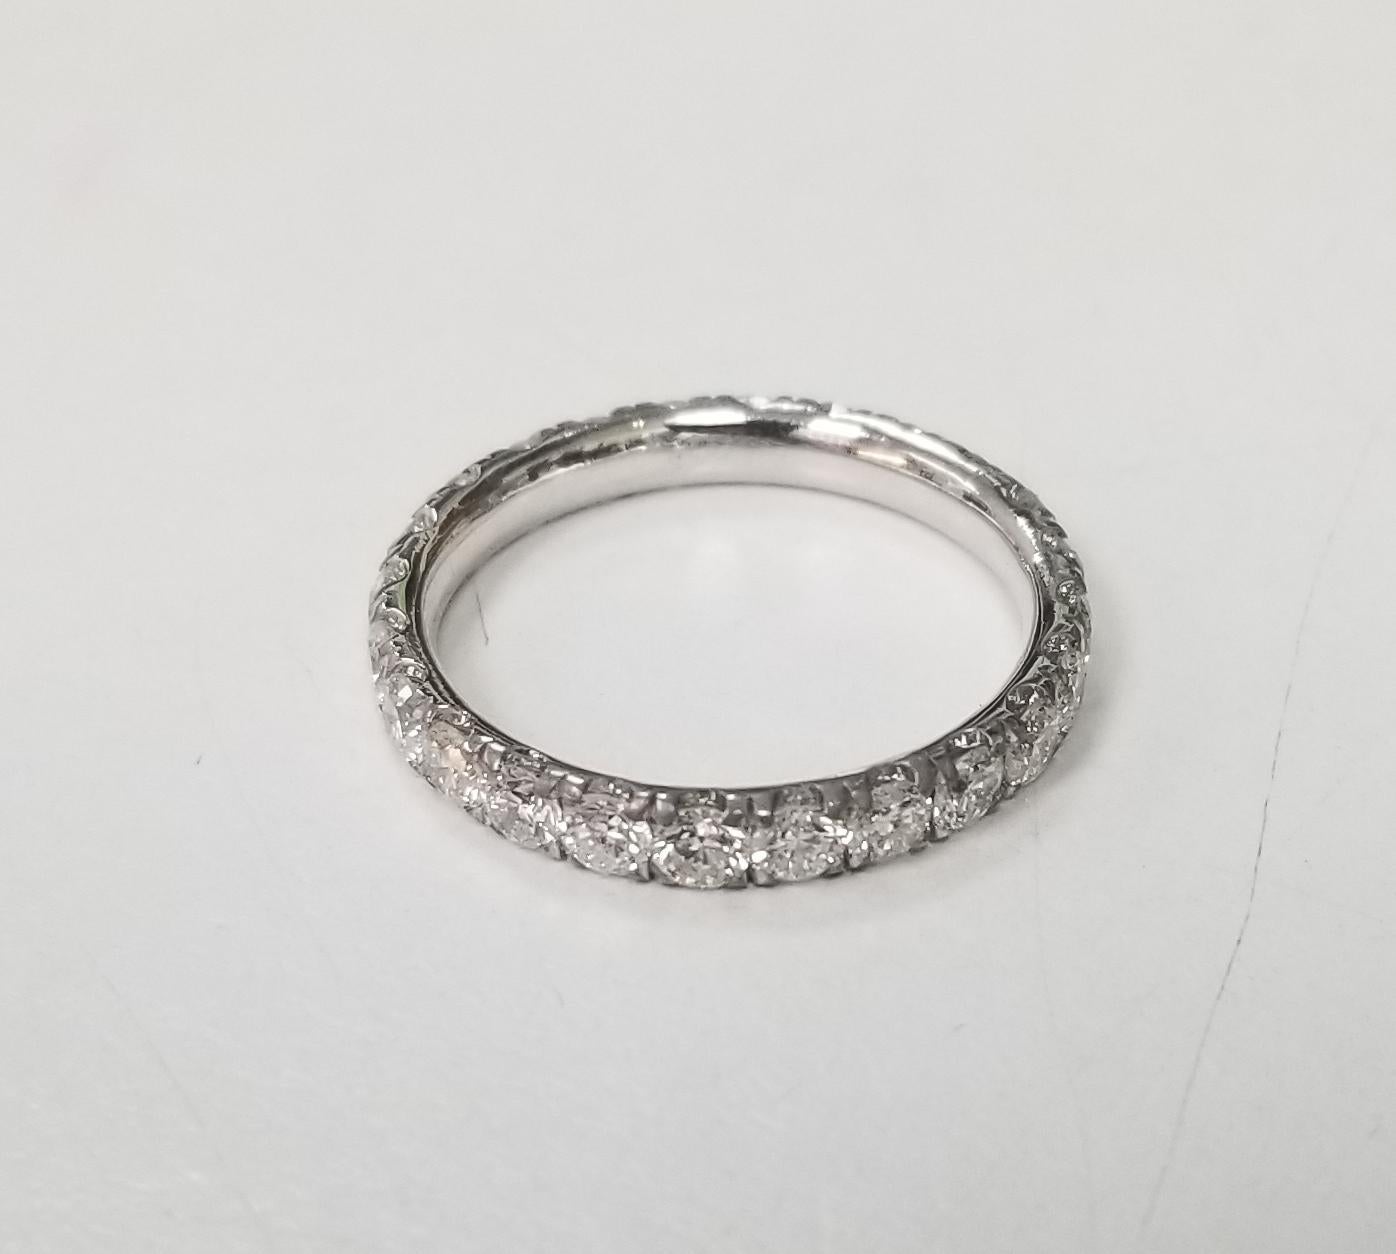 BRILLIANT CUT DIAMOND ETERNITY RING IN 14K WHITE GOLD 1.75 CTW. Set in comfort fit and shared prongs.
Specifications:
    main stone: BRILLIANT CUT DIAMOND
    diamonds: 24 PIECES
    carat total weight: 1.75
    color:  G
    clarity: VS2
   